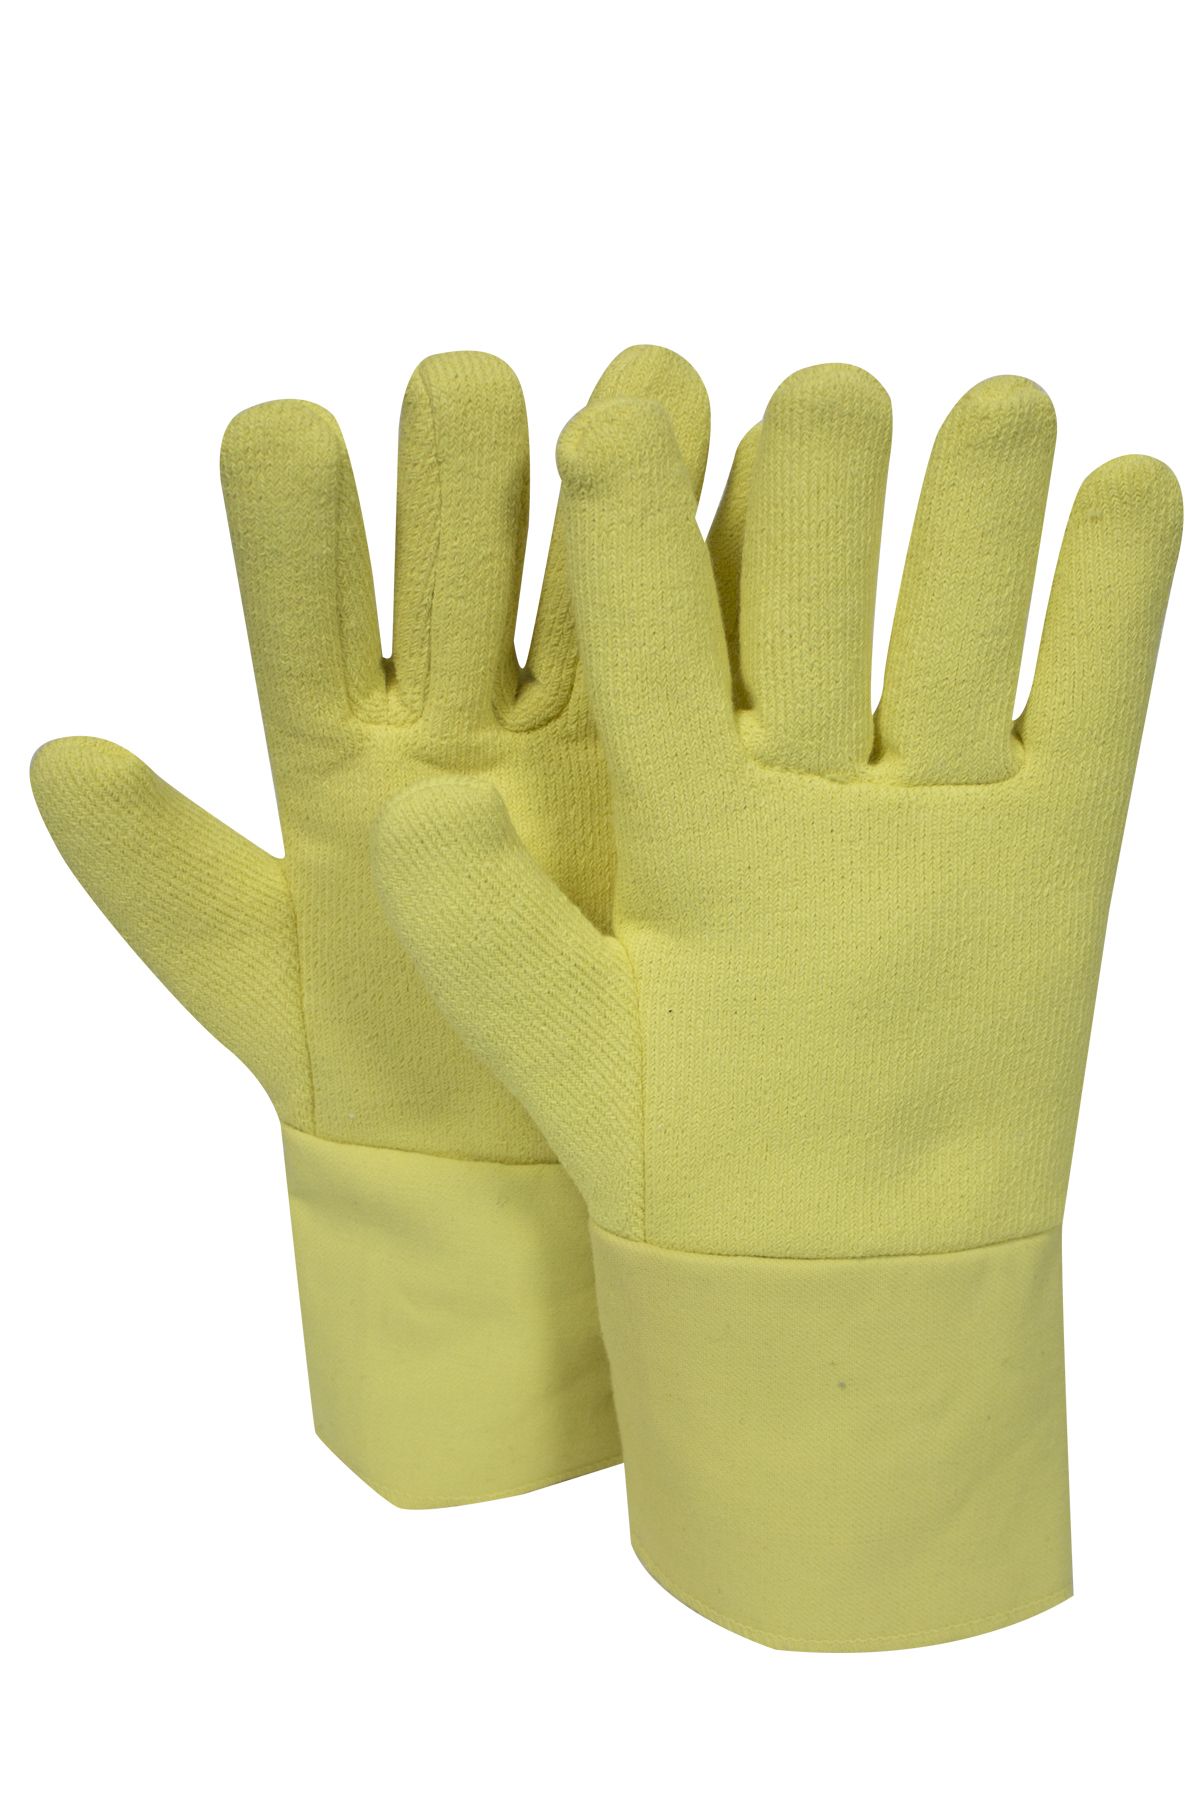 National Safety Apparel Reversed Terry Cloth Glove, 12" (pair)